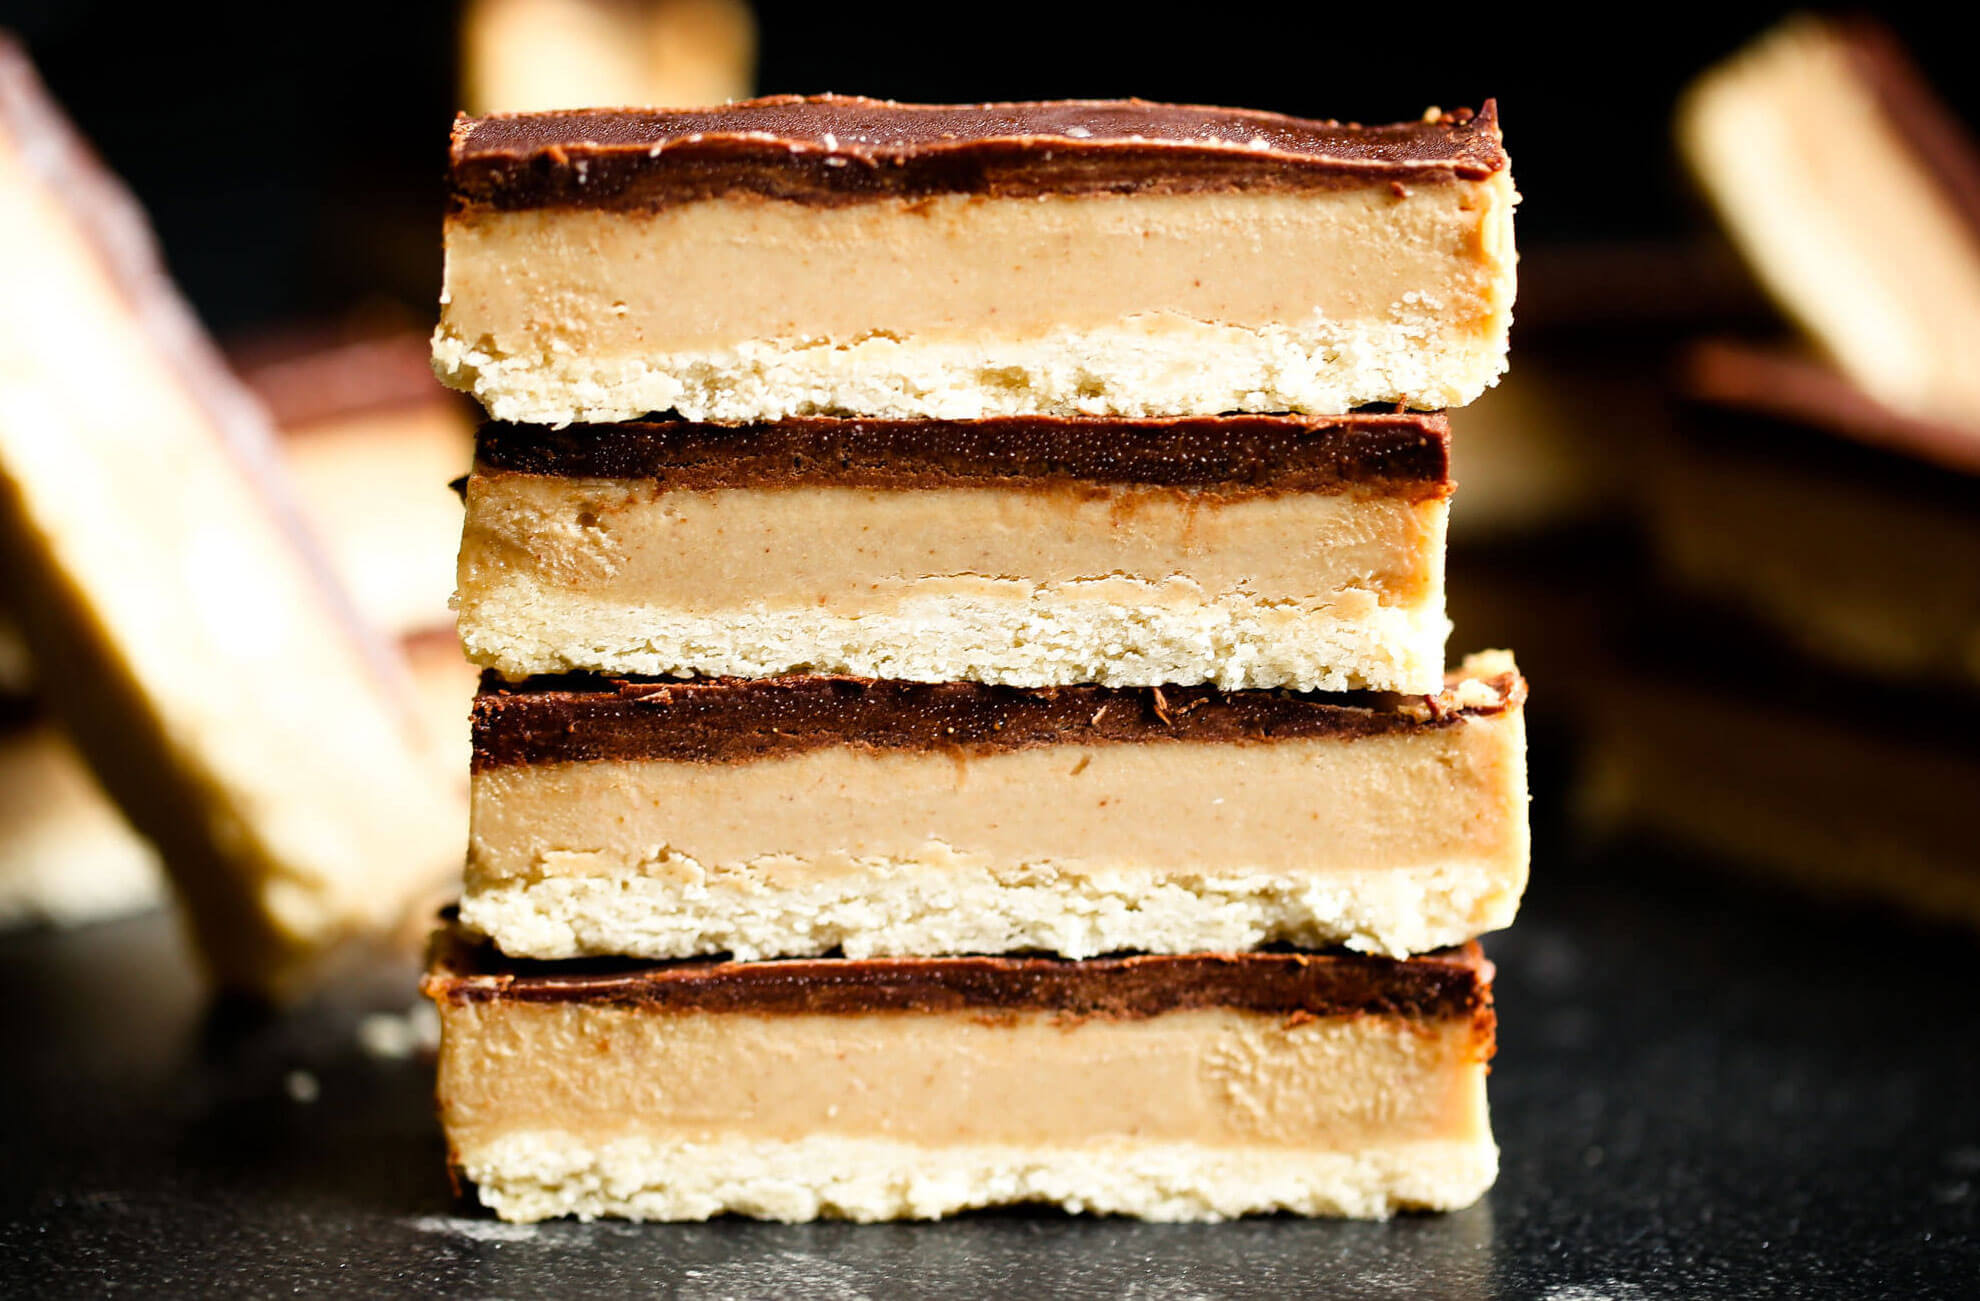 Make these healthy paleo Twix bars at home! You won’t be able to tell the difference between these copycat candy bars and the popular original. Game changer: this recipe for healthy homemade paleo Twix candy bars. They are paleo, gluten free, sugar free, and vegan. Healthy homemade Twix bar recipe. Homemade paleo Twix candy bars. Homemade Twix bars. Healthy candy recipe. Homemade paleo candy. Homemade paleo chocolate candy. Easy paleo wit bars. Easy best homemade Twix bars.